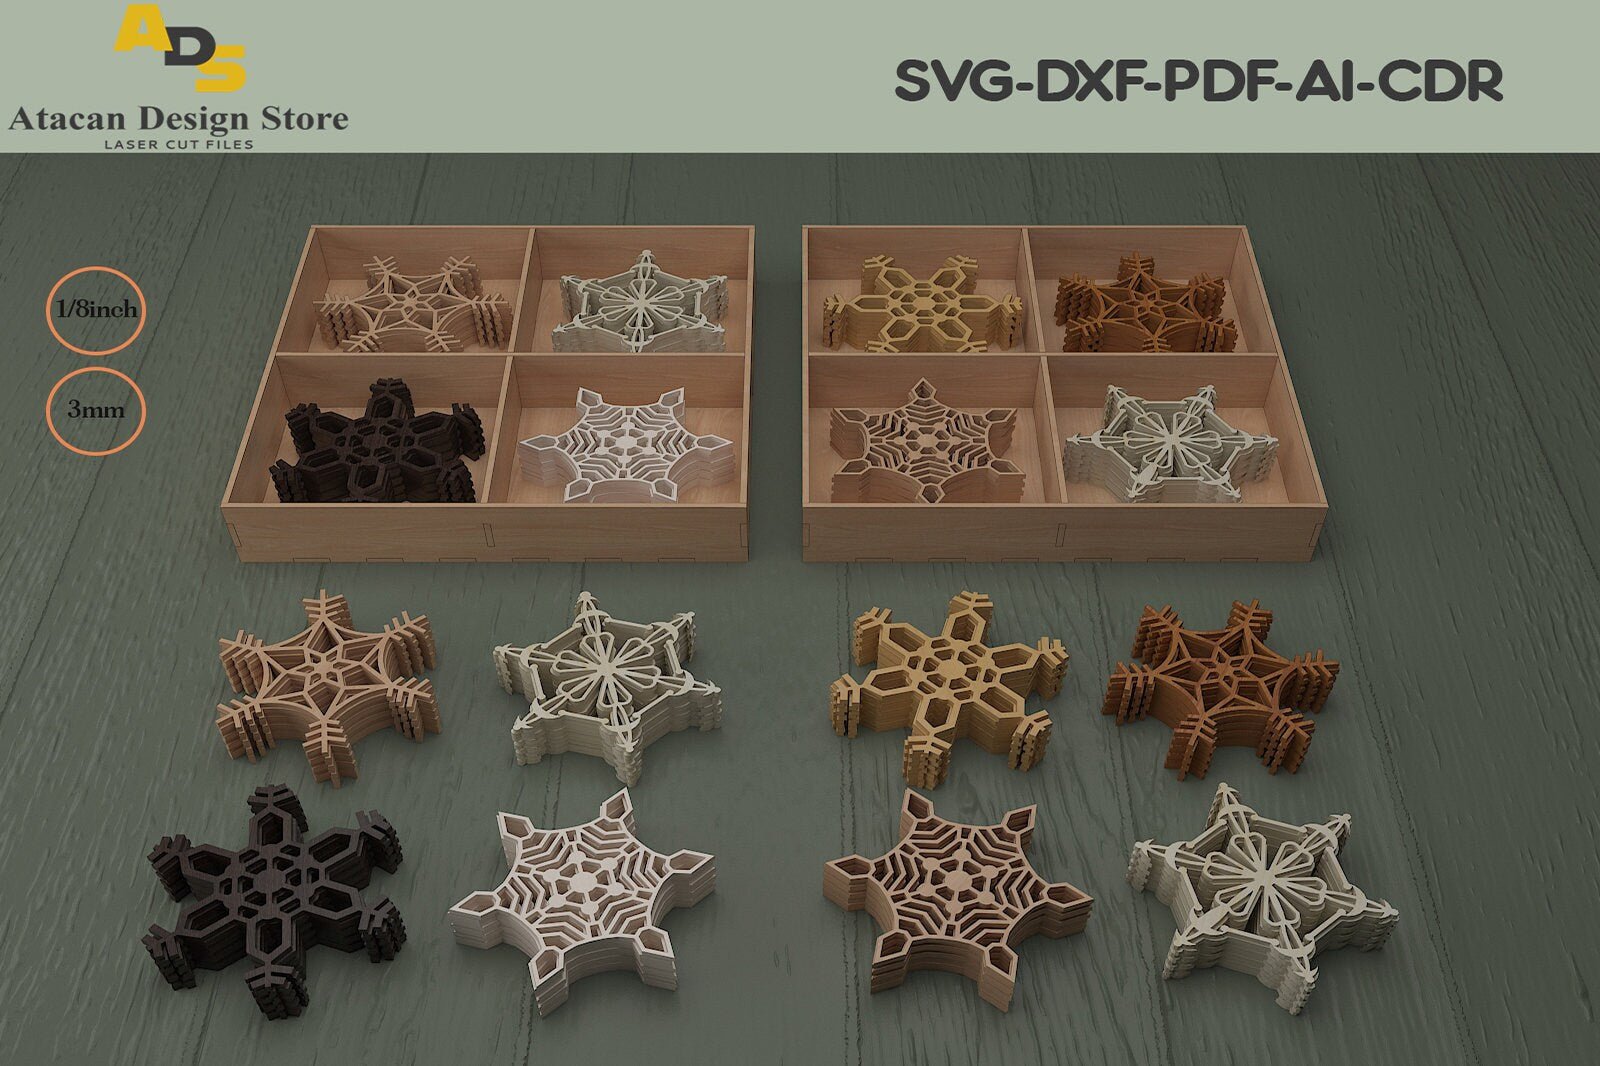 Snowflake Coaster Set / Divided Laser Box and Chtistmas Decors / Snowflake patterns Cutting Files ADS210